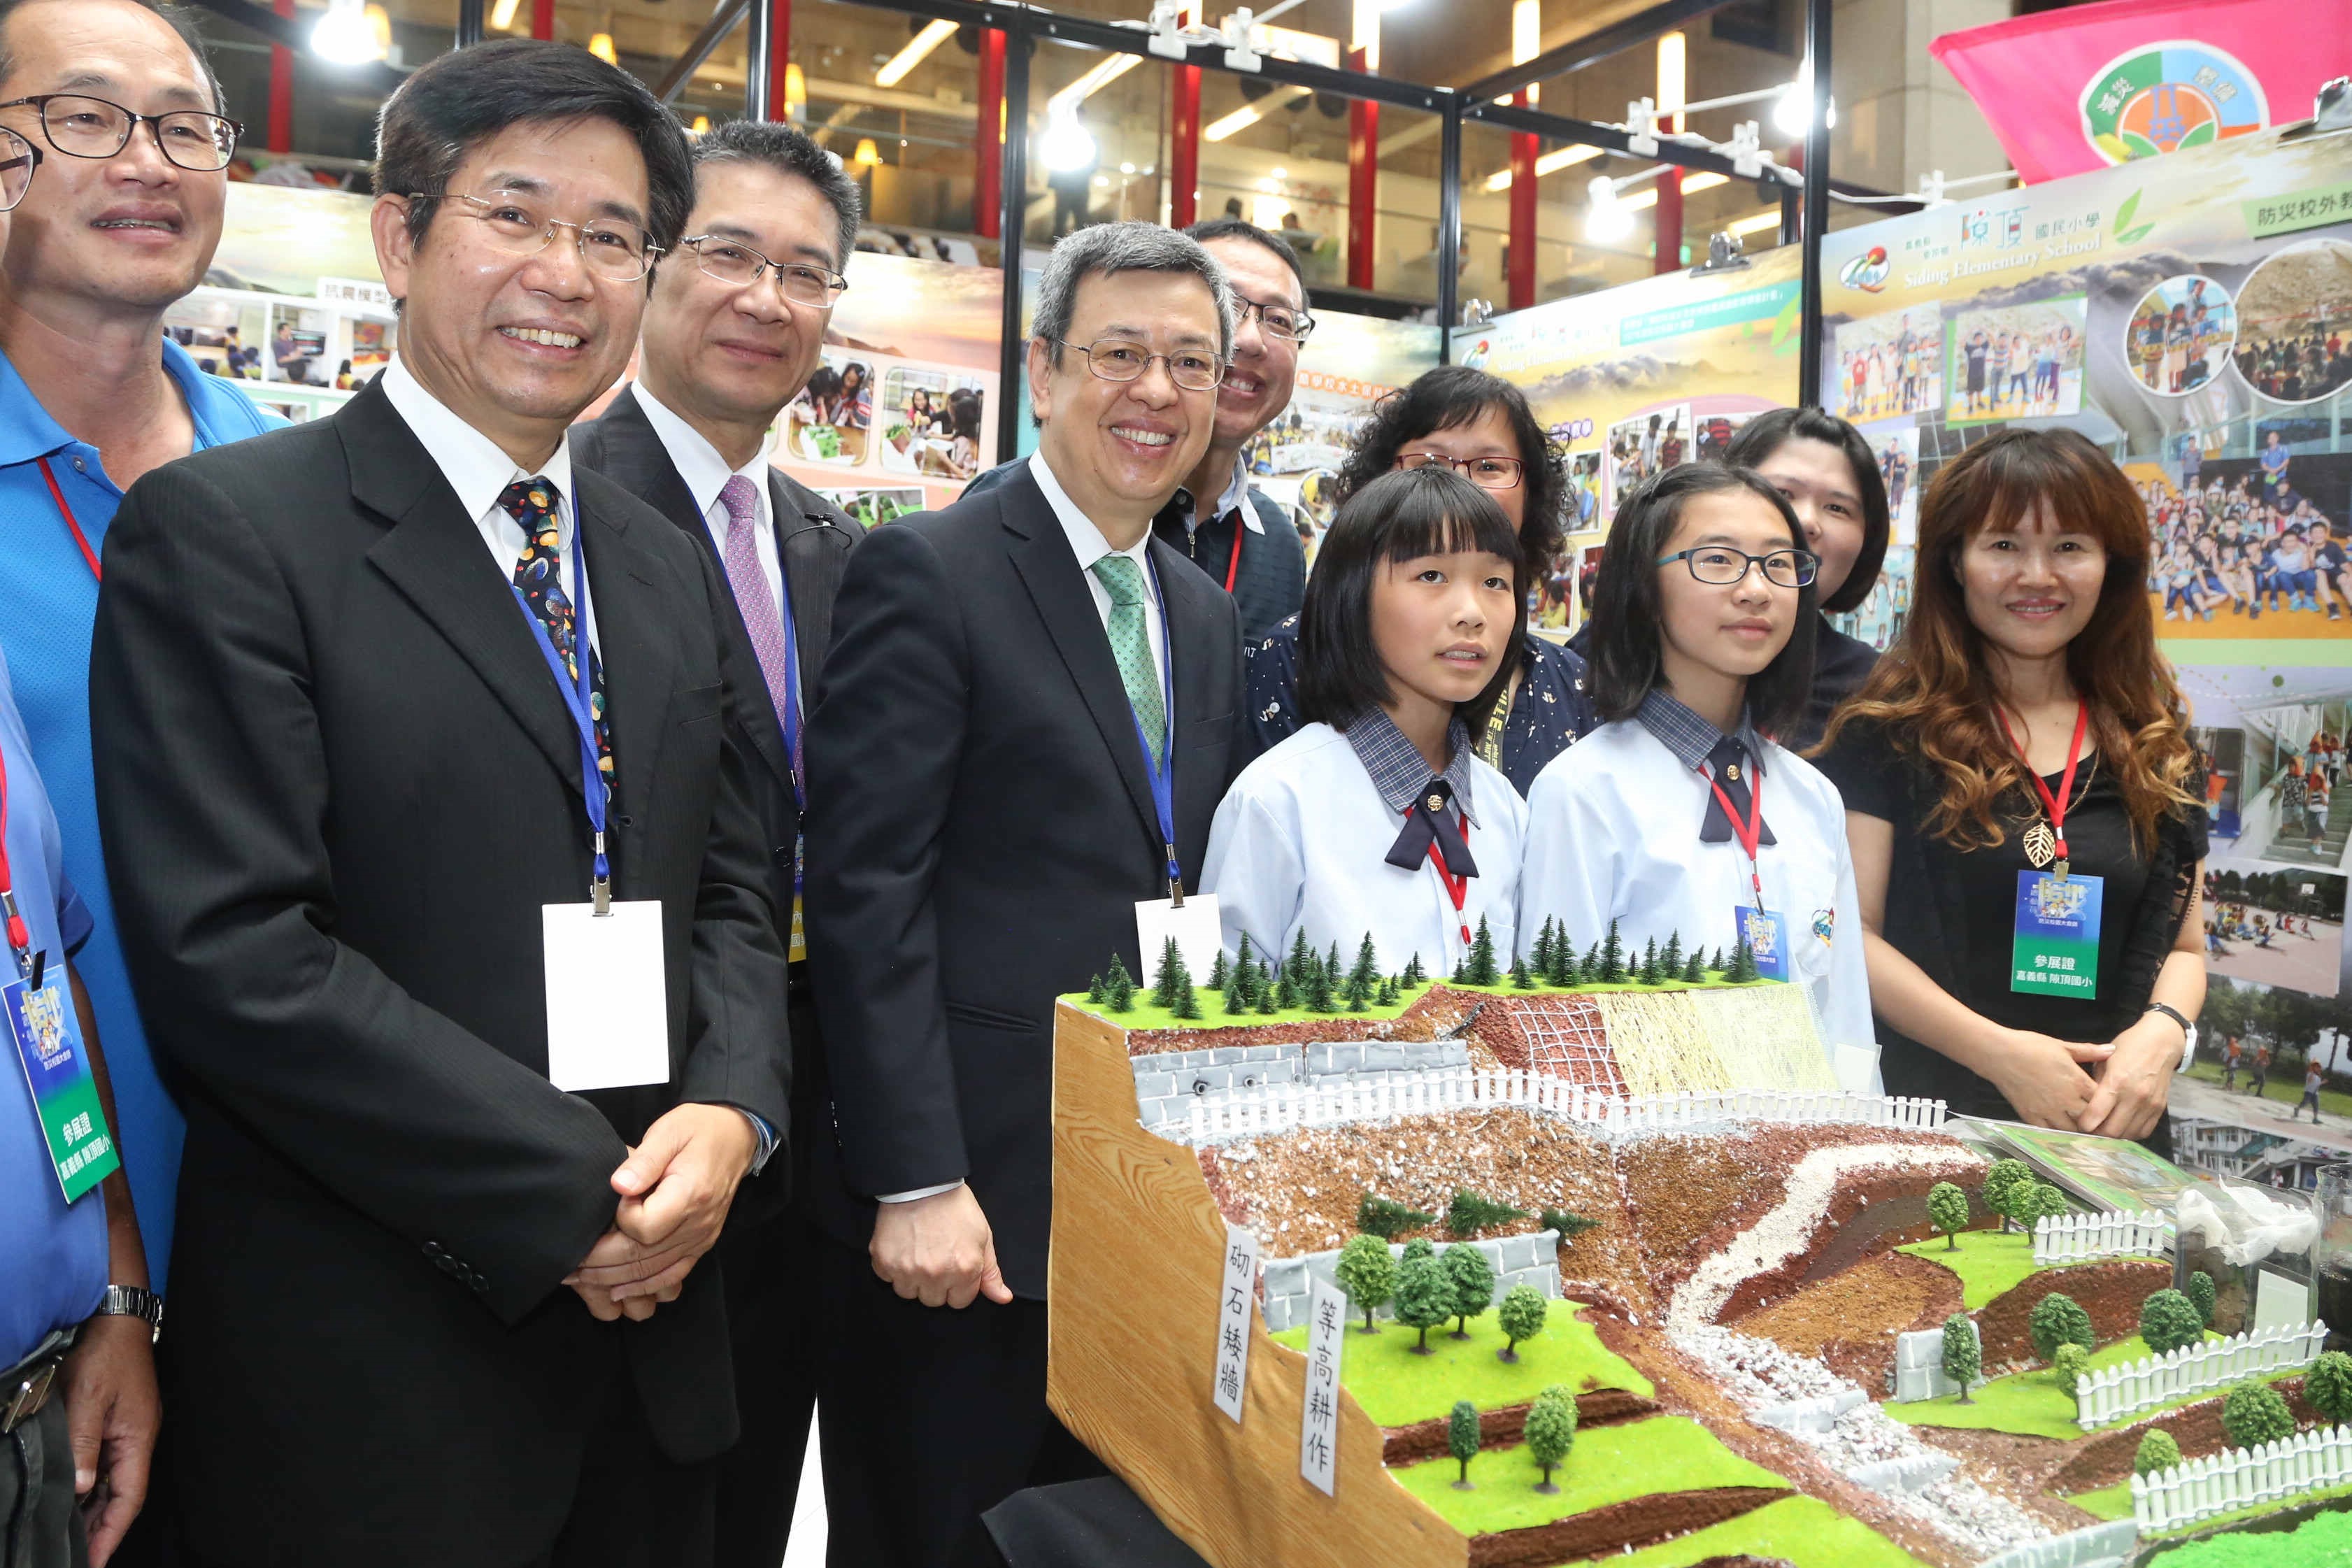 The Gathering of Disaster-resilient Schools:  Eight Ministries Collaborate on Disaster Risk Reduction Education,  Demonstrate Achievements through a Powerful Pop-up Exhibition at Taipei Main Station